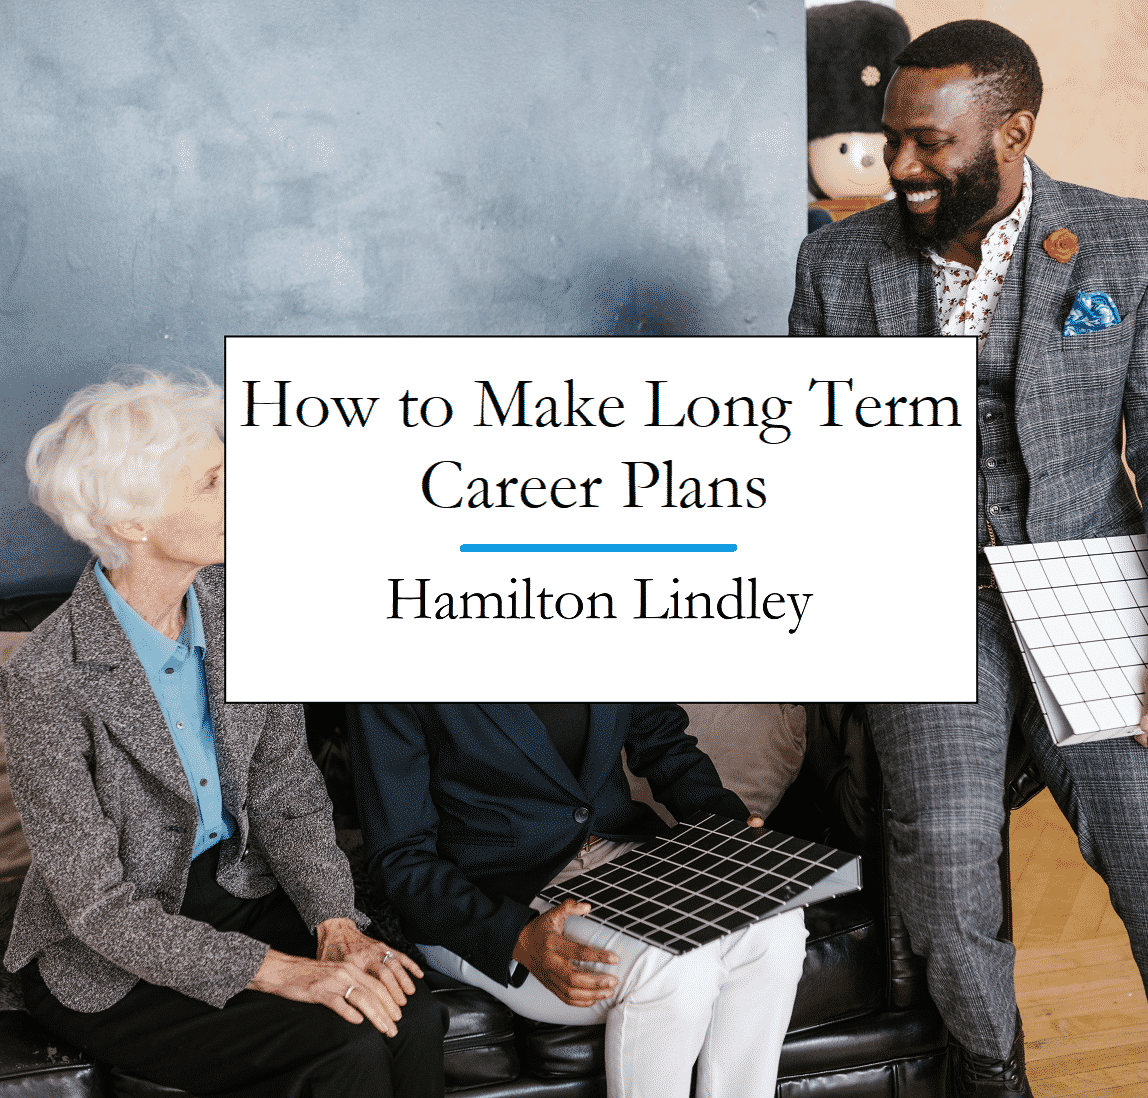 How to Make Long-Term Career Plans